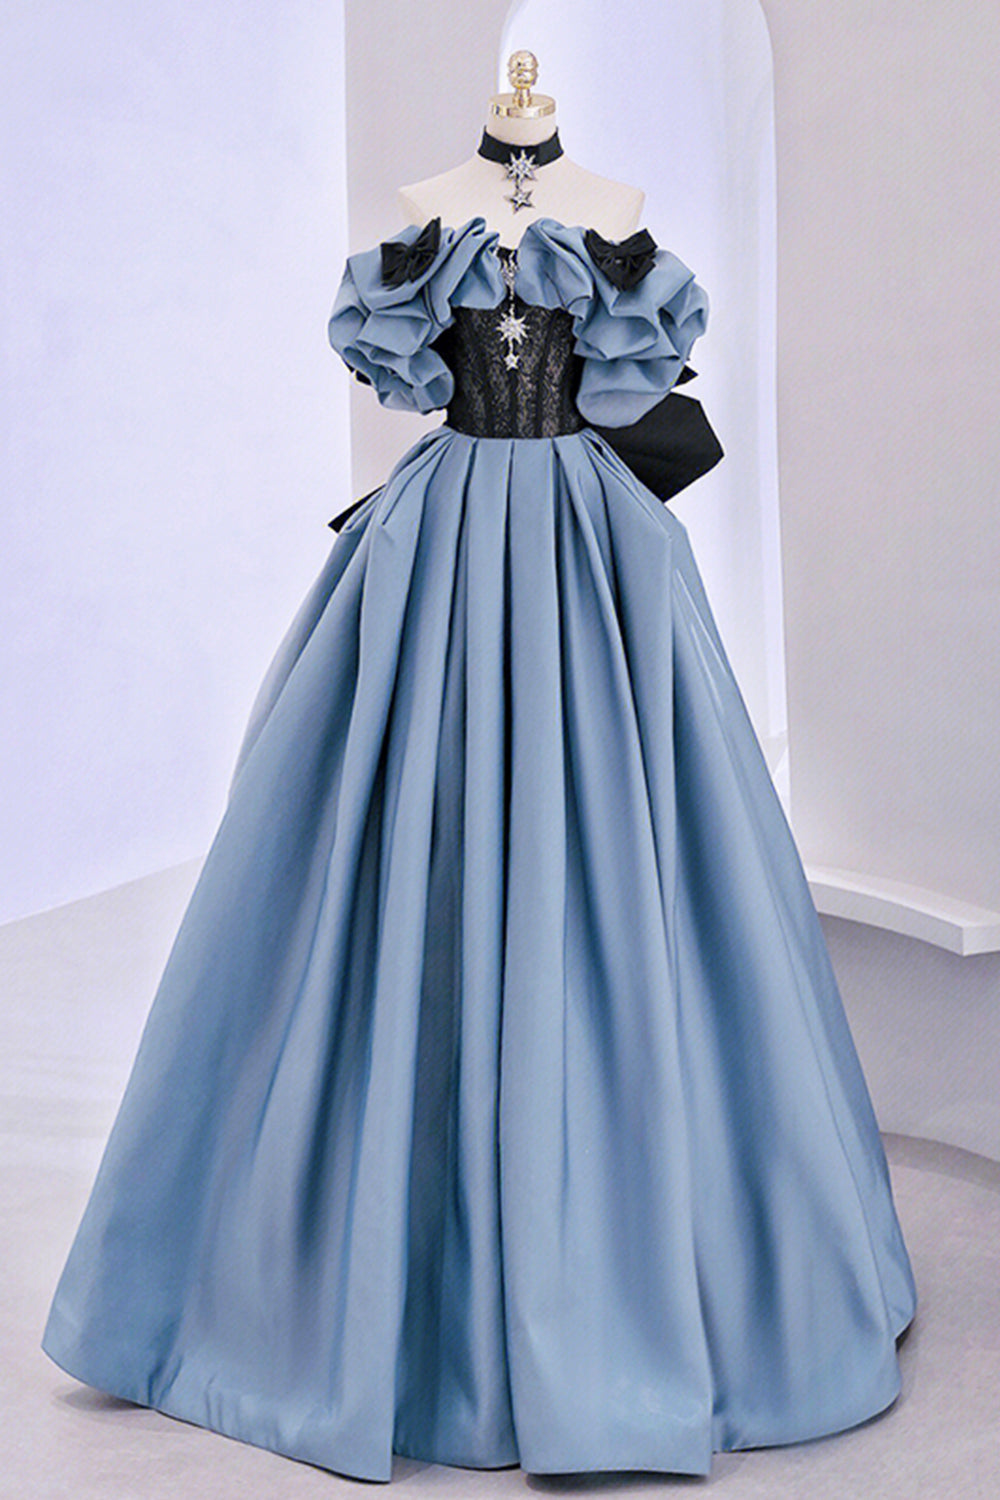 Blue Satin Lace Long Prom Dress Outfits For Girls, Off Shoulder Evening Party Dress